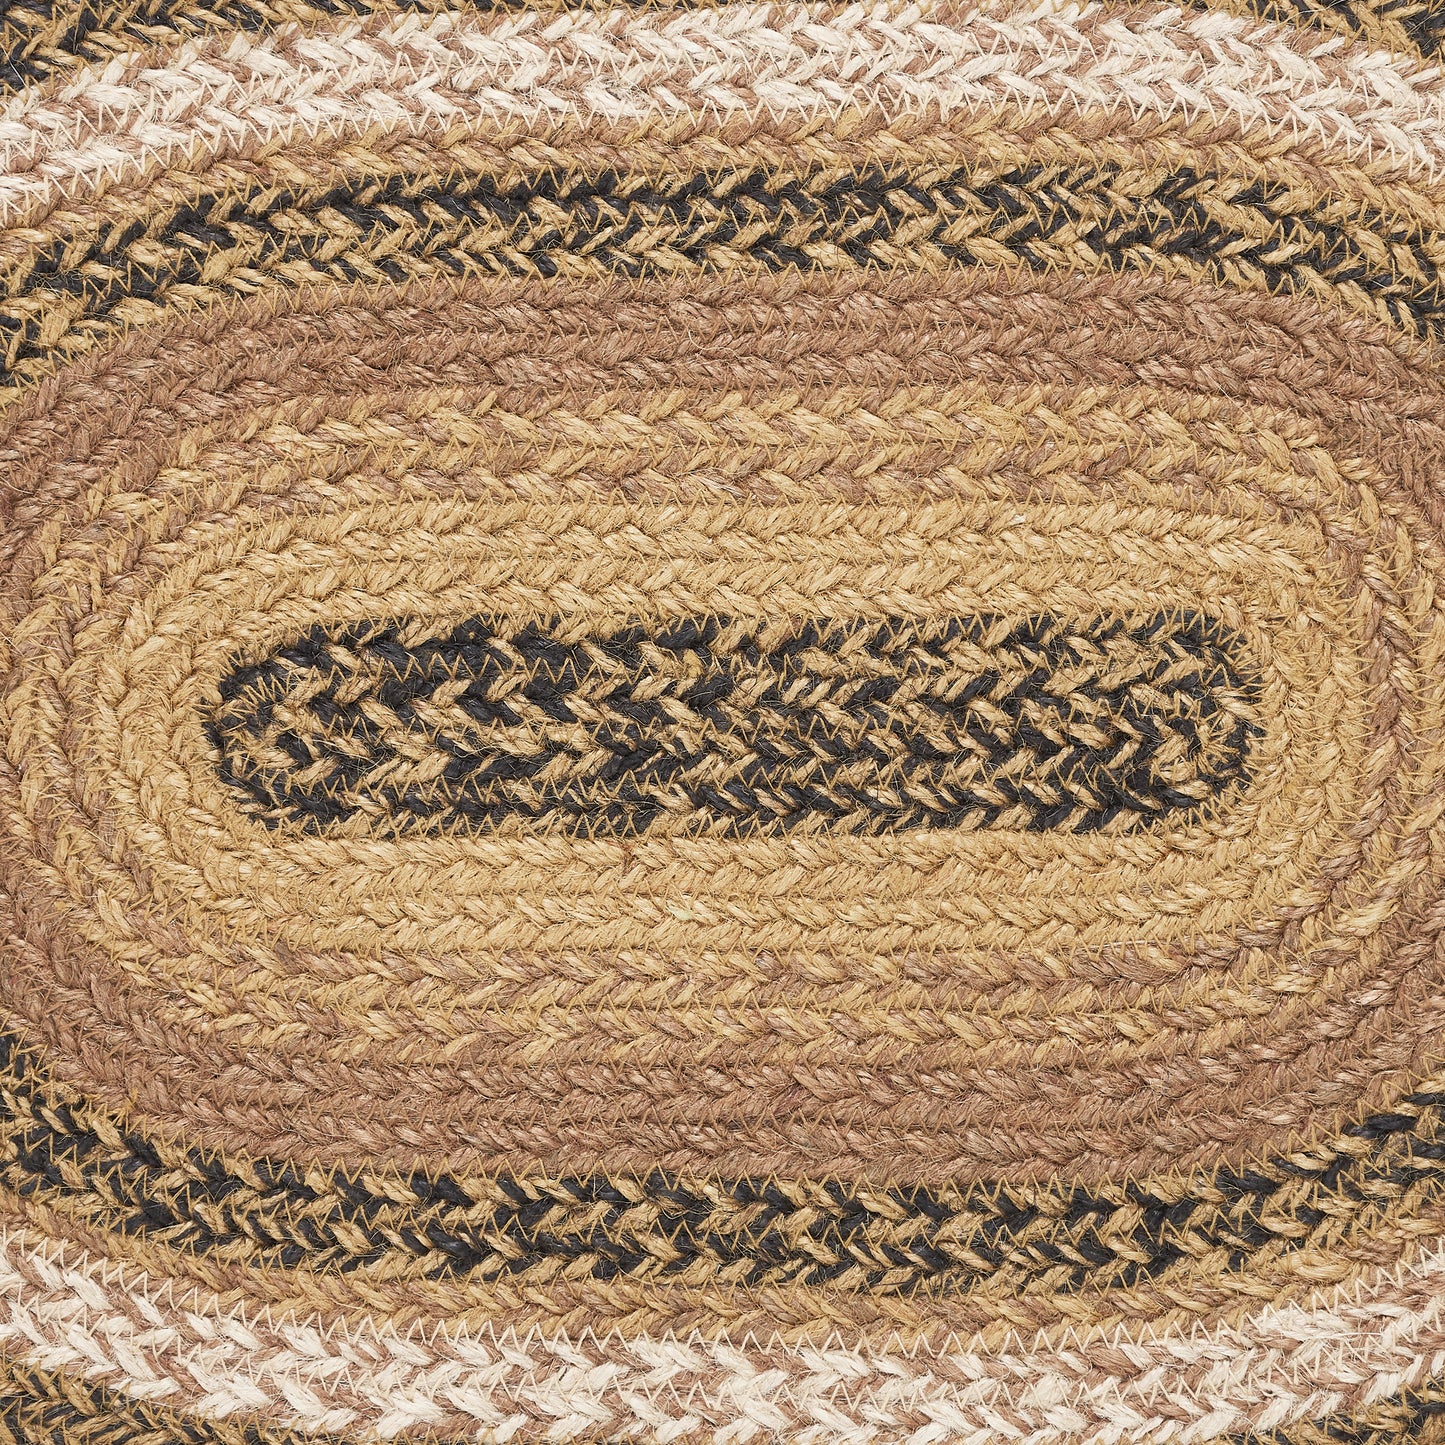 81387-Kettle-Grove-Jute-Oval-Placemat-12x18-image-3